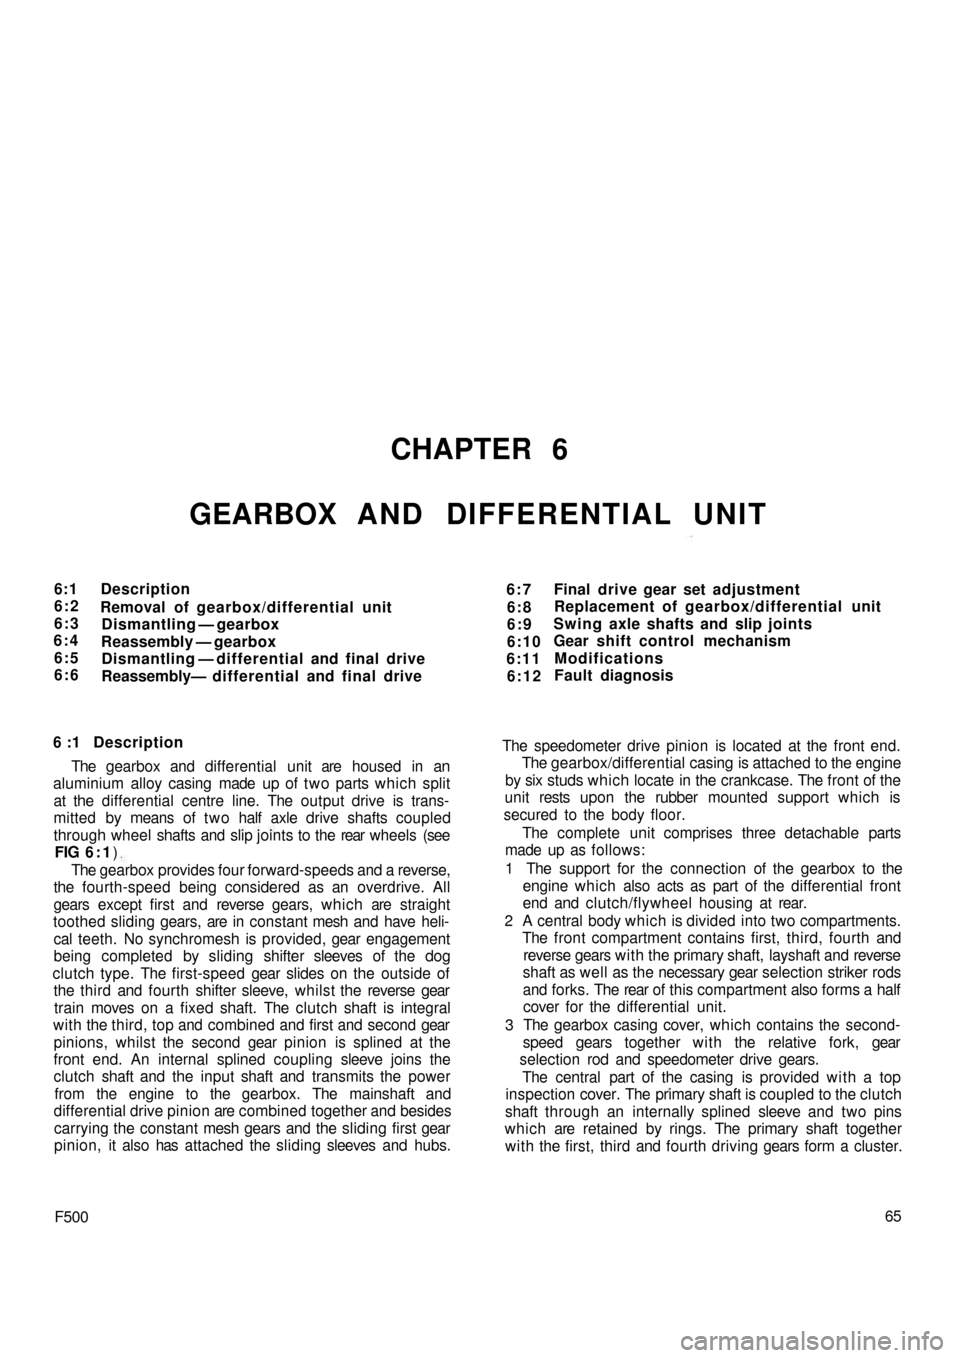 FIAT 500 1970 1.G Repair Manual CHAPTER 6
GEARBOX AND DIFFERENTIAL UNIT
6:1
6:2
6:3
6:4
6:5
6:6Description
Removal of gearbox/differential unit
Dismantling — gearbox
Reassembly — gearbox
Dismantling — differential and final dr